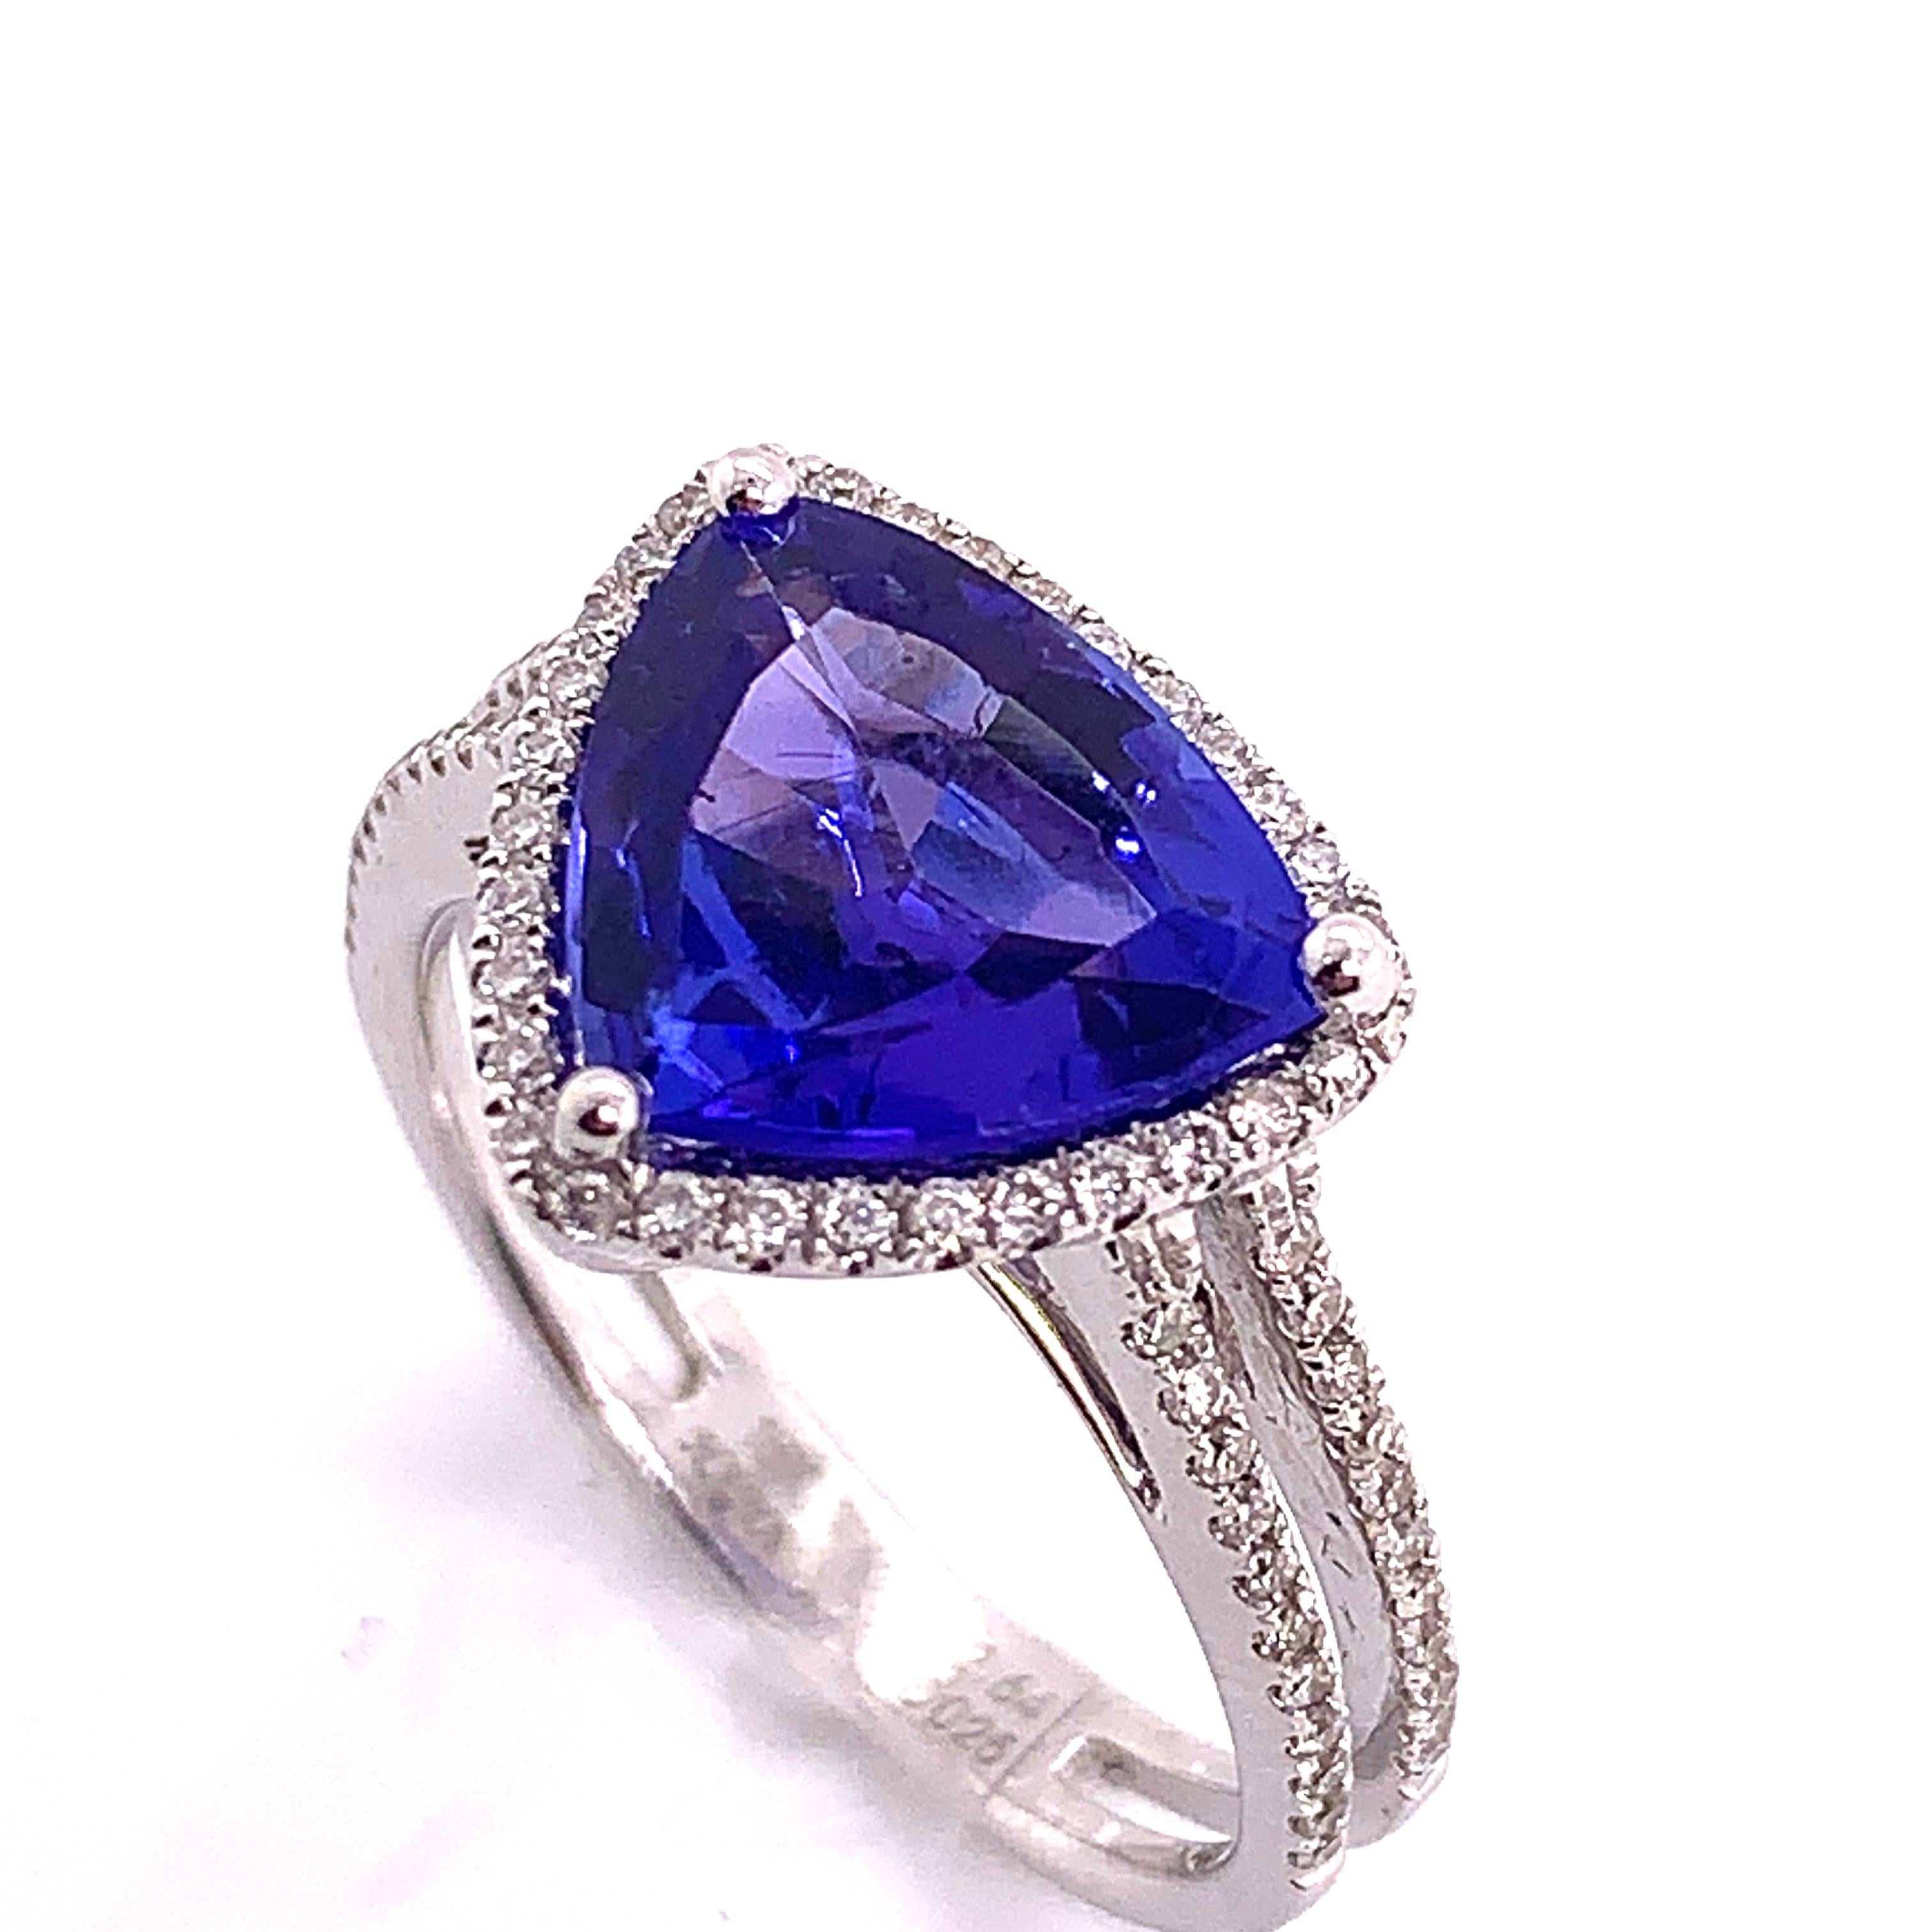 A beautiful 18K white gold ring made by Shimon's Creations featuring a 2.64 carat tanzanite with a strong and shiny blue color and 0.25 carat diamonds.
 
Color Stone And Diamond Breakdown:
Diamonds: 0.25 carats - 74 round stones 
Tanzanite: 2.64